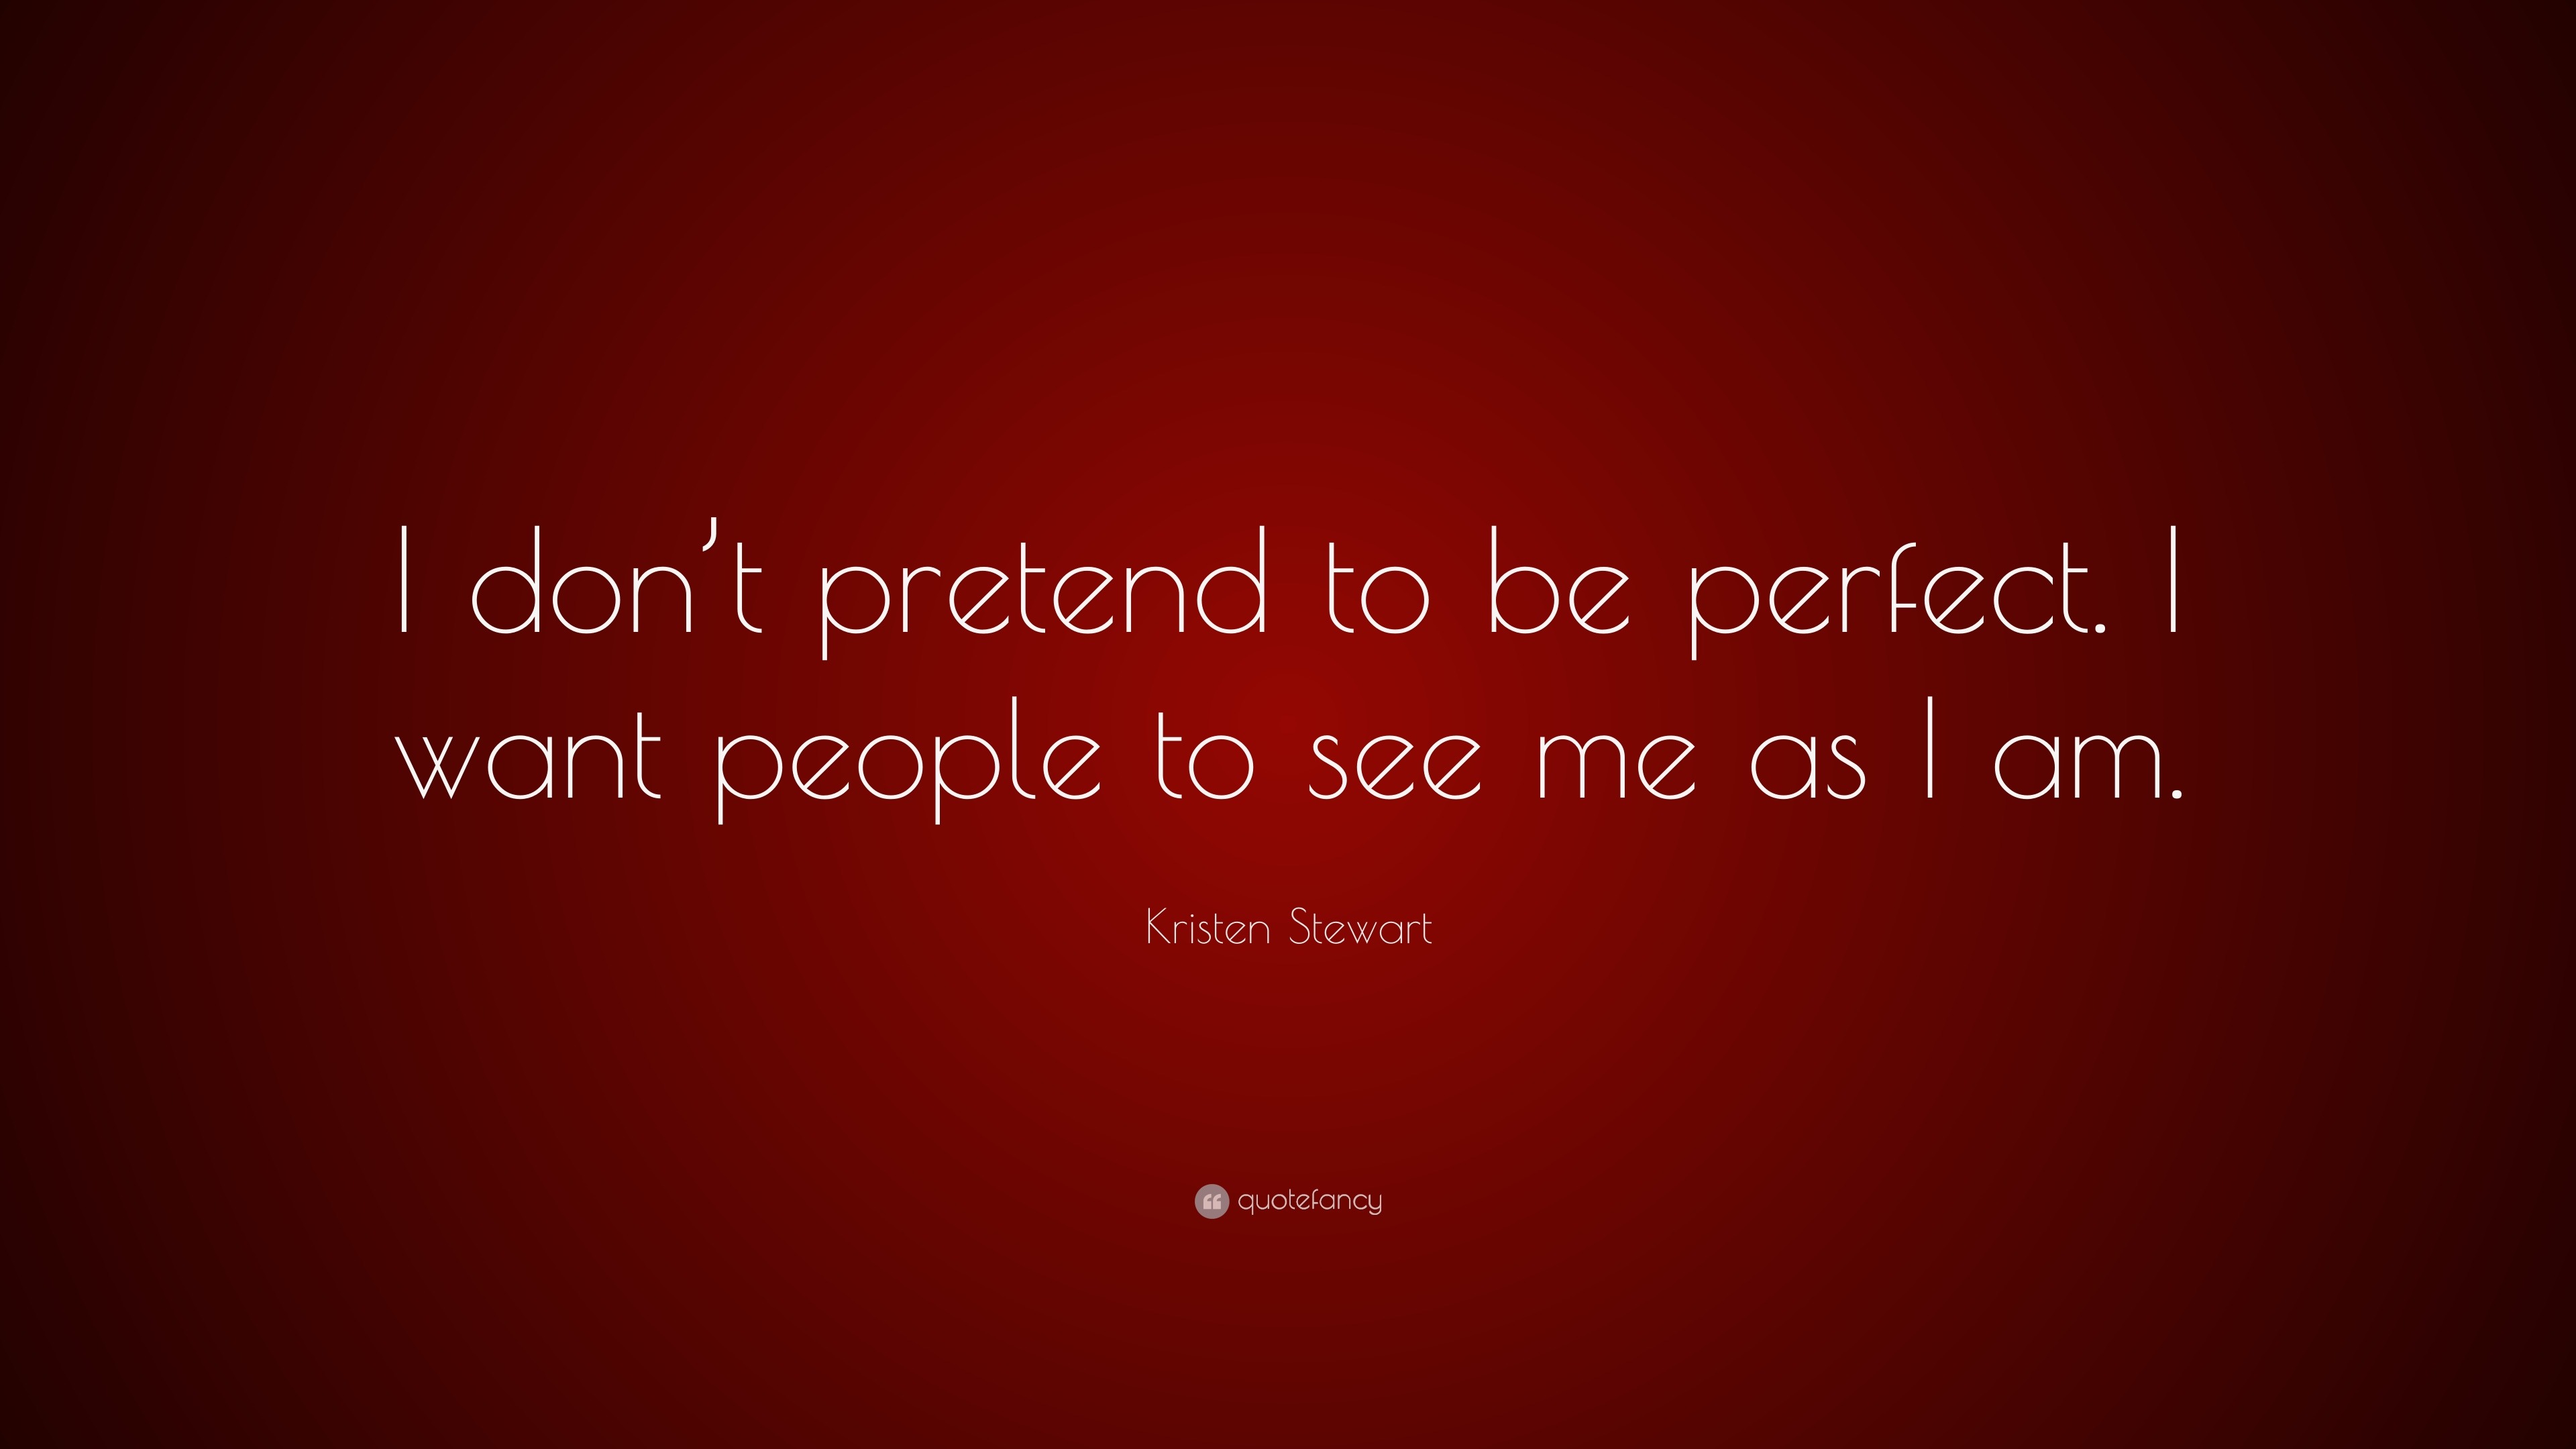 Kristen Stewart Quote: “I don’t pretend to be perfect. I want people to ...